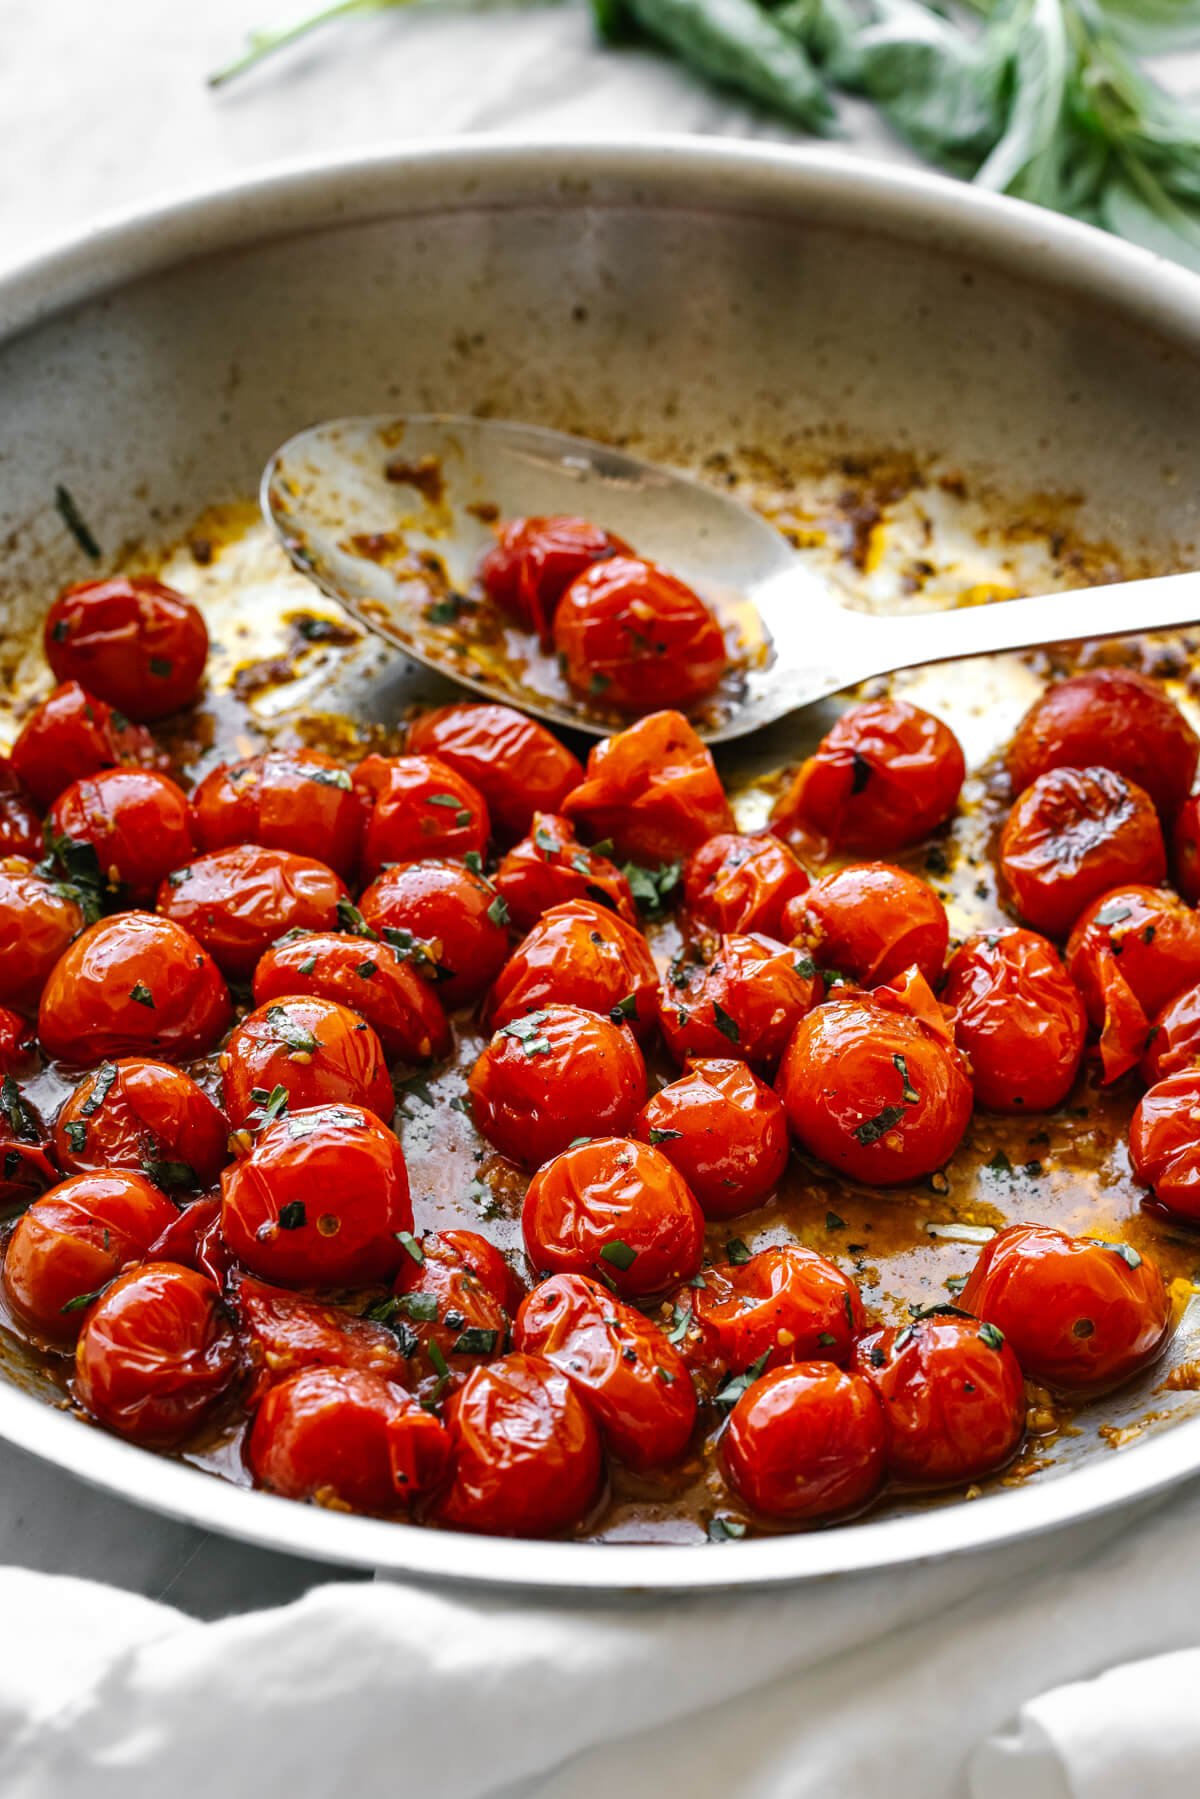 A pan with blistered tomatoes next to basil.